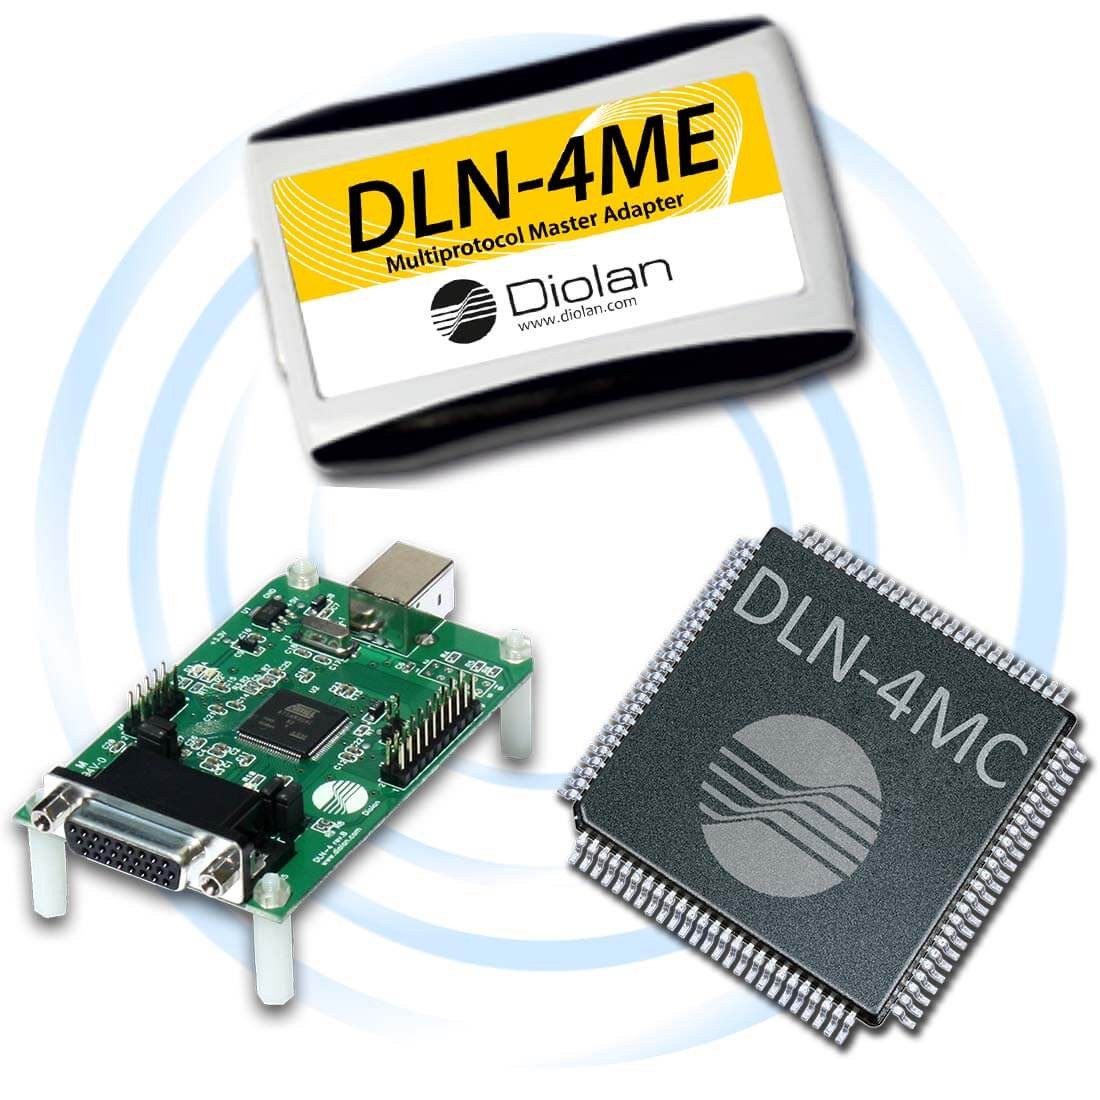 DLN-4M Multiprotocol Master Adapter (DLN Adapter Group)